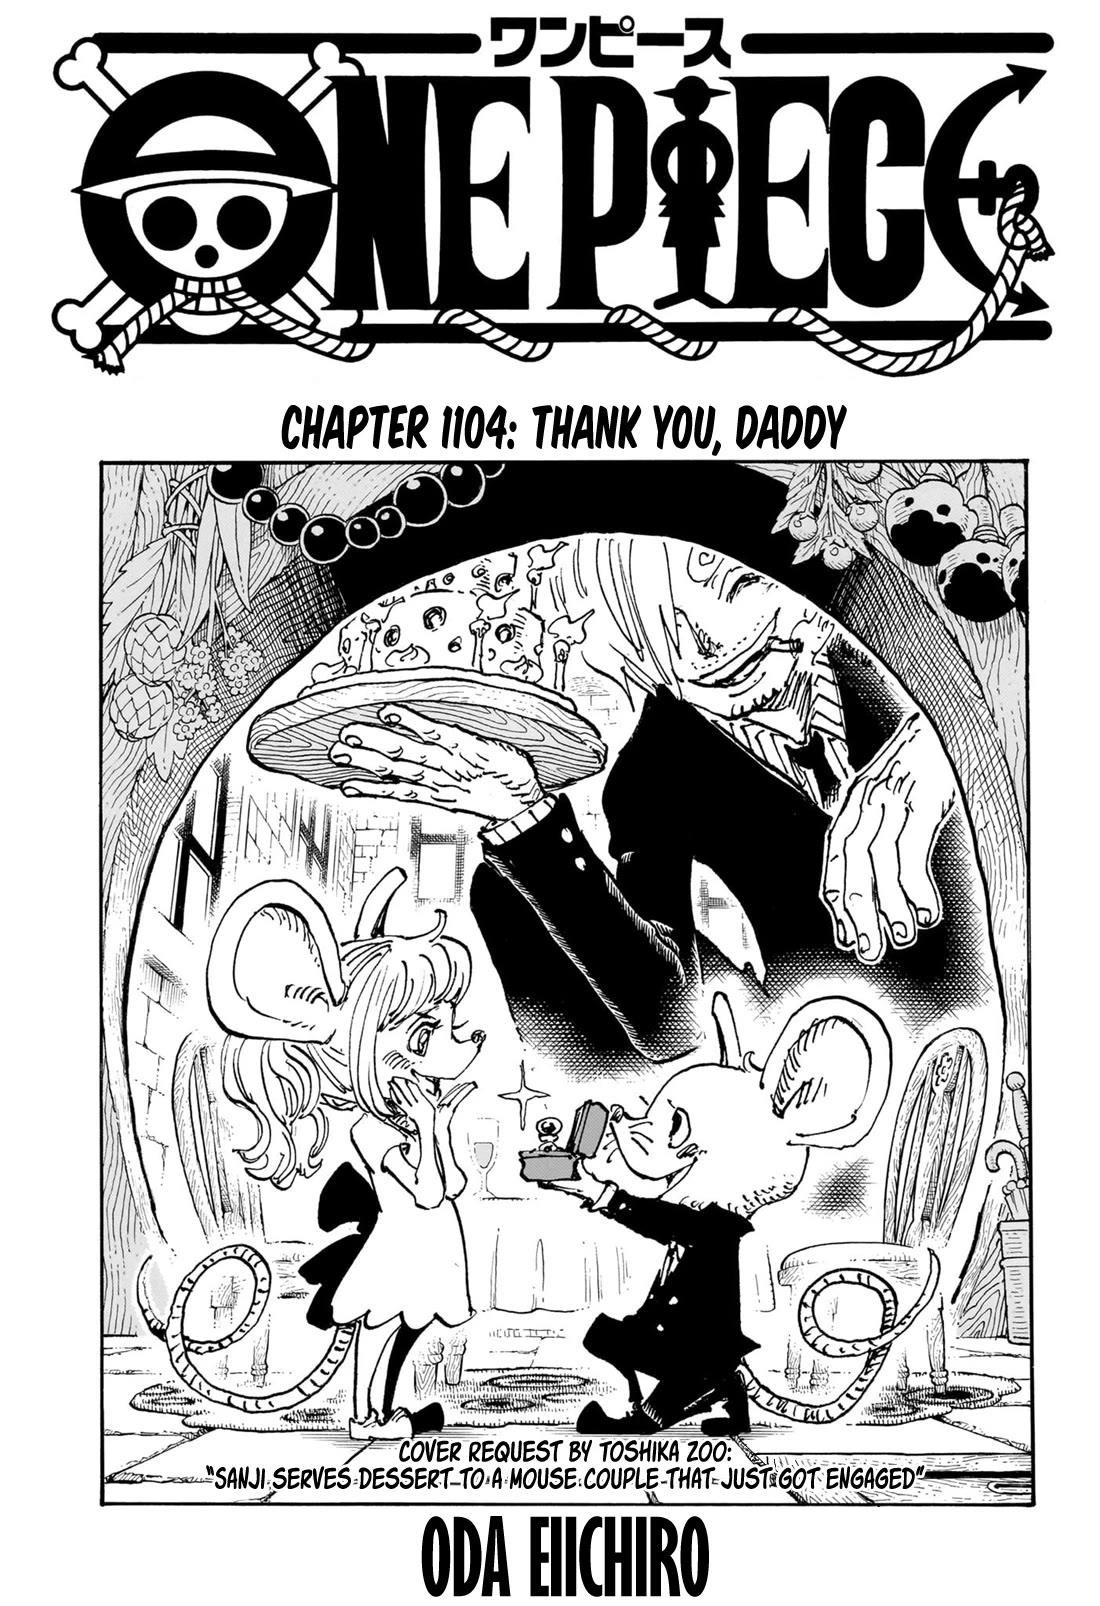 One Piece Chapter 1104 - Page 1